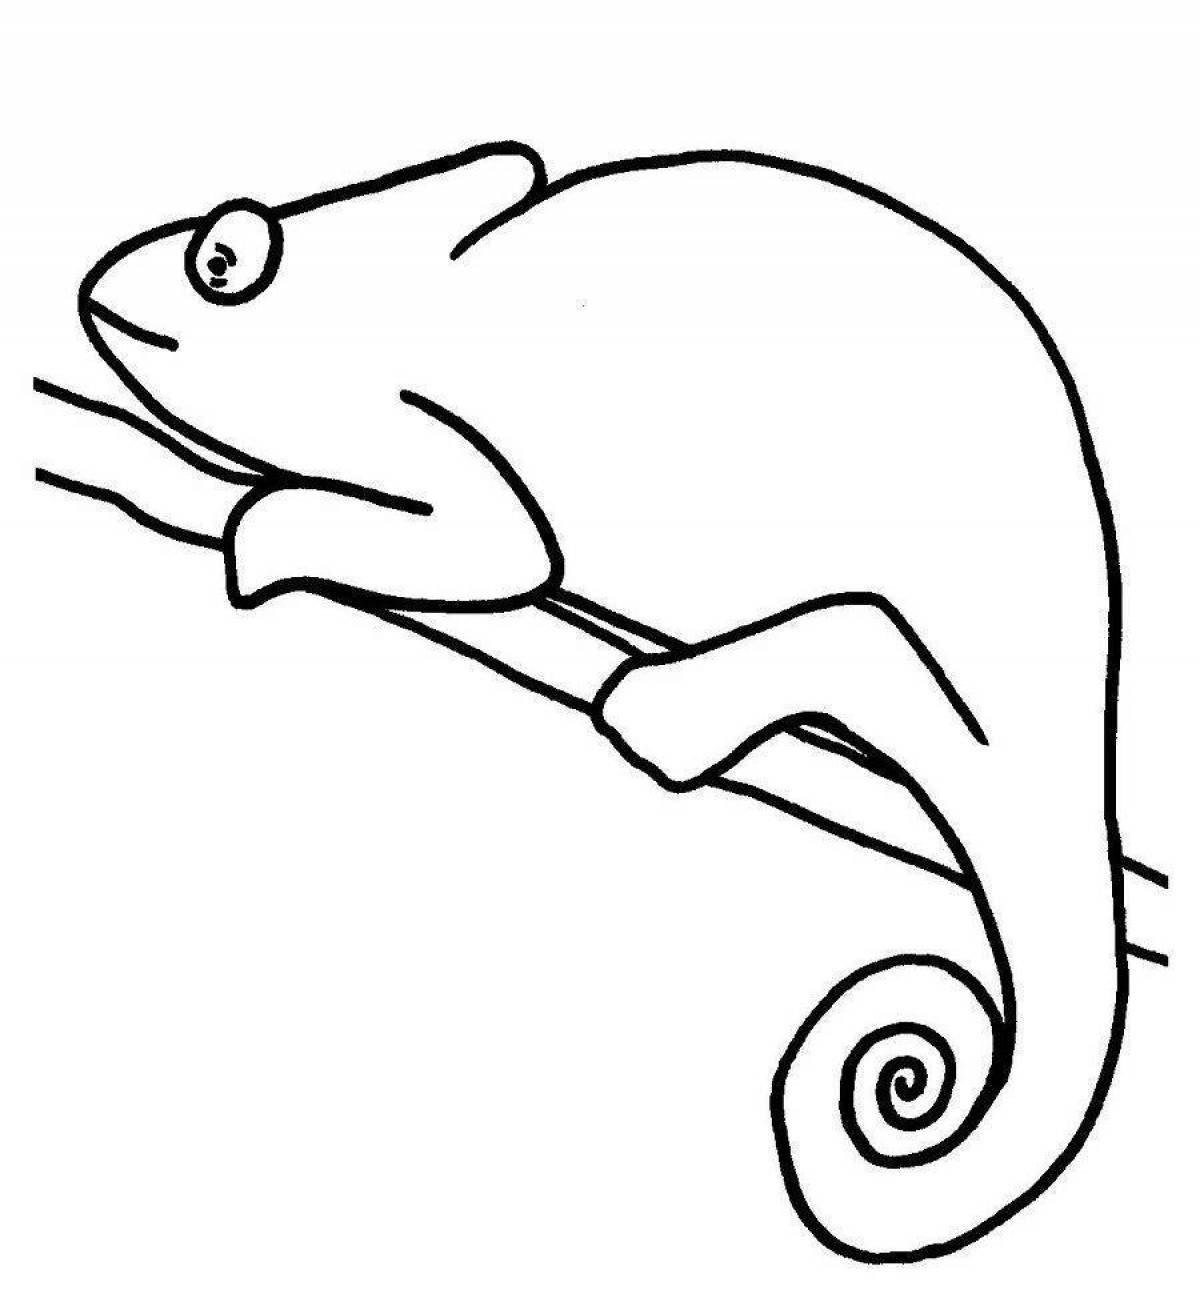 Outstanding chameleon coloring page